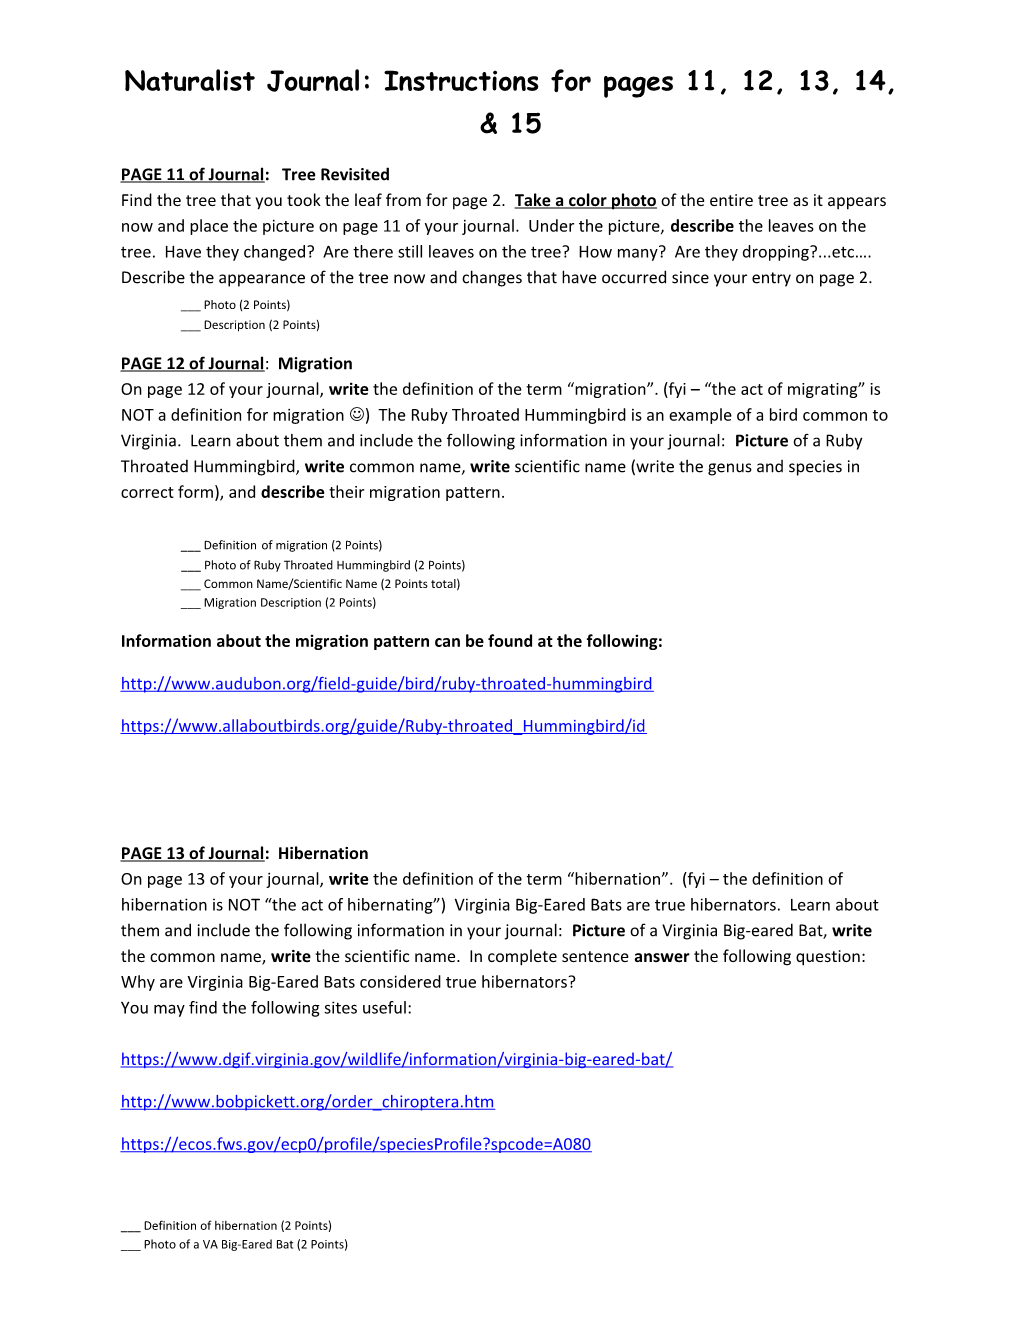 Naturalist Journal: Instructions for Pages 11, 12, 13, 14, & 15